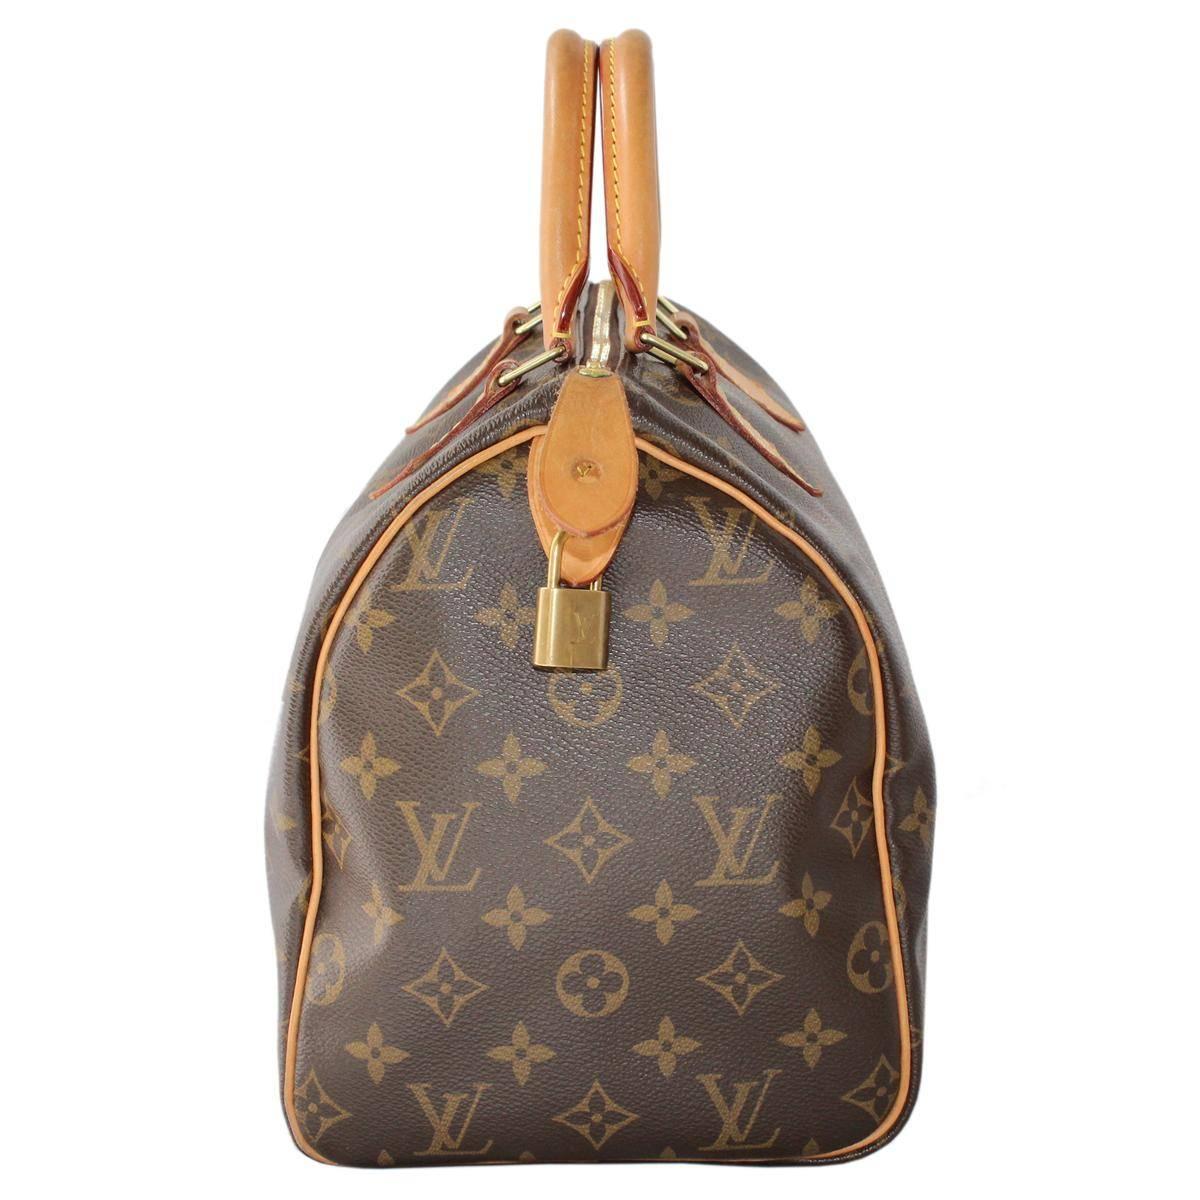 Iconic Louis Vuitton Speedy bag
Monogram canvas
Natural cowhide leather handles
Zip closure
Internal pocket
Cm 30 x 21 x 17 (11.8 x 8.26 x 6.7 inches)
With padlock and keys
Dustbag and box
Year 2014
Worldwide express shipping included in the price !